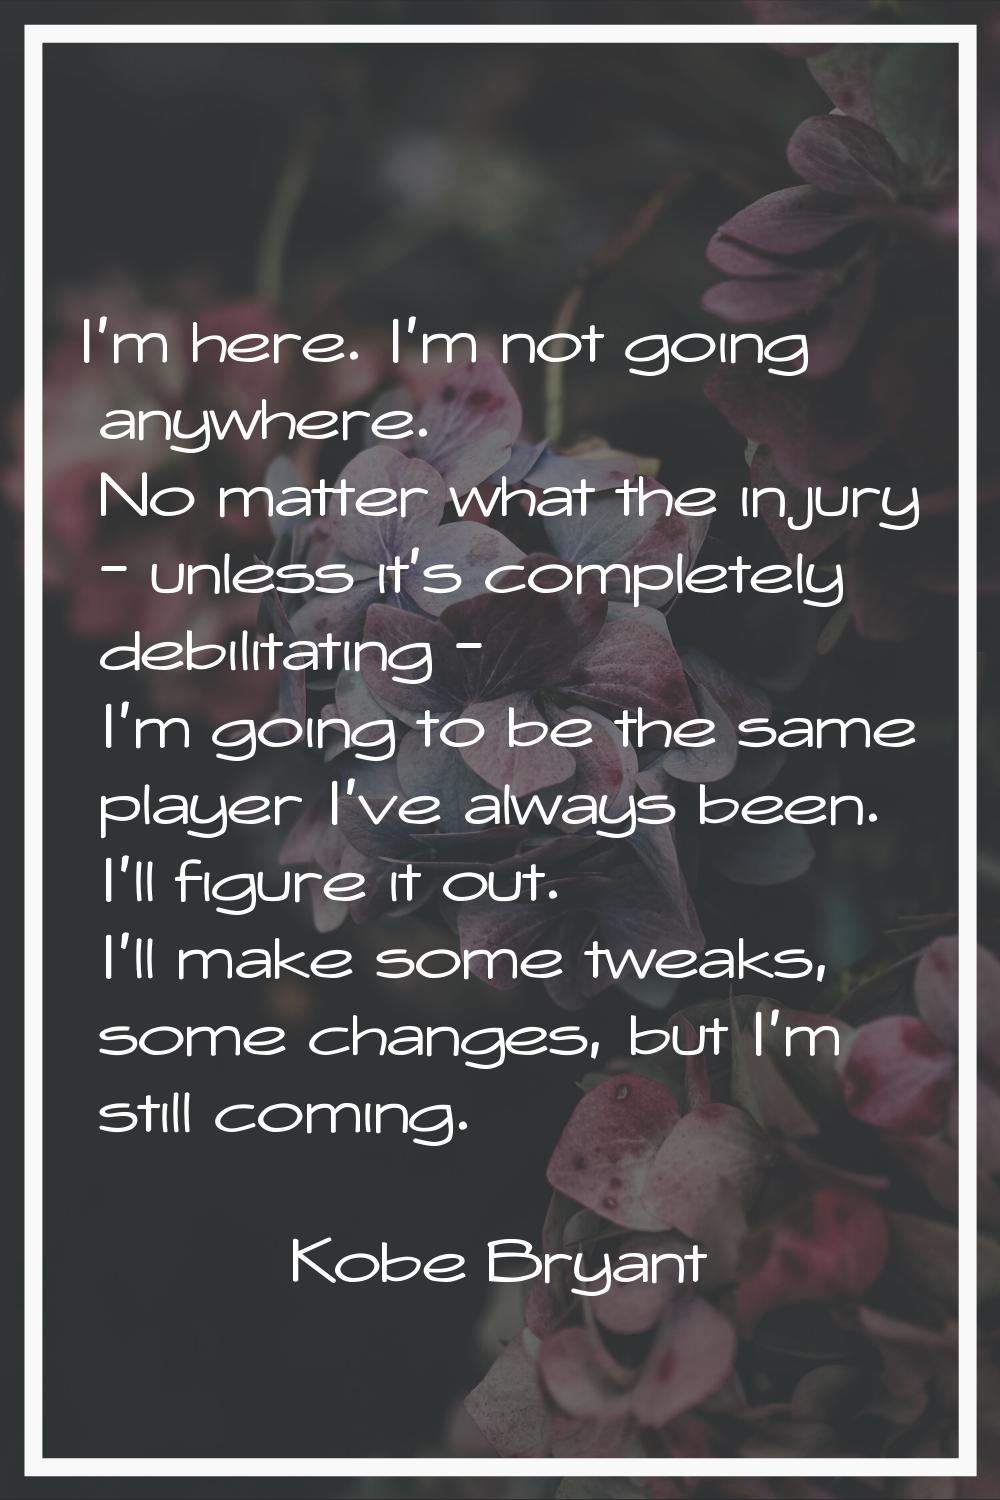 I'm here. I'm not going anywhere. No matter what the injury - unless it's completely debilitating -